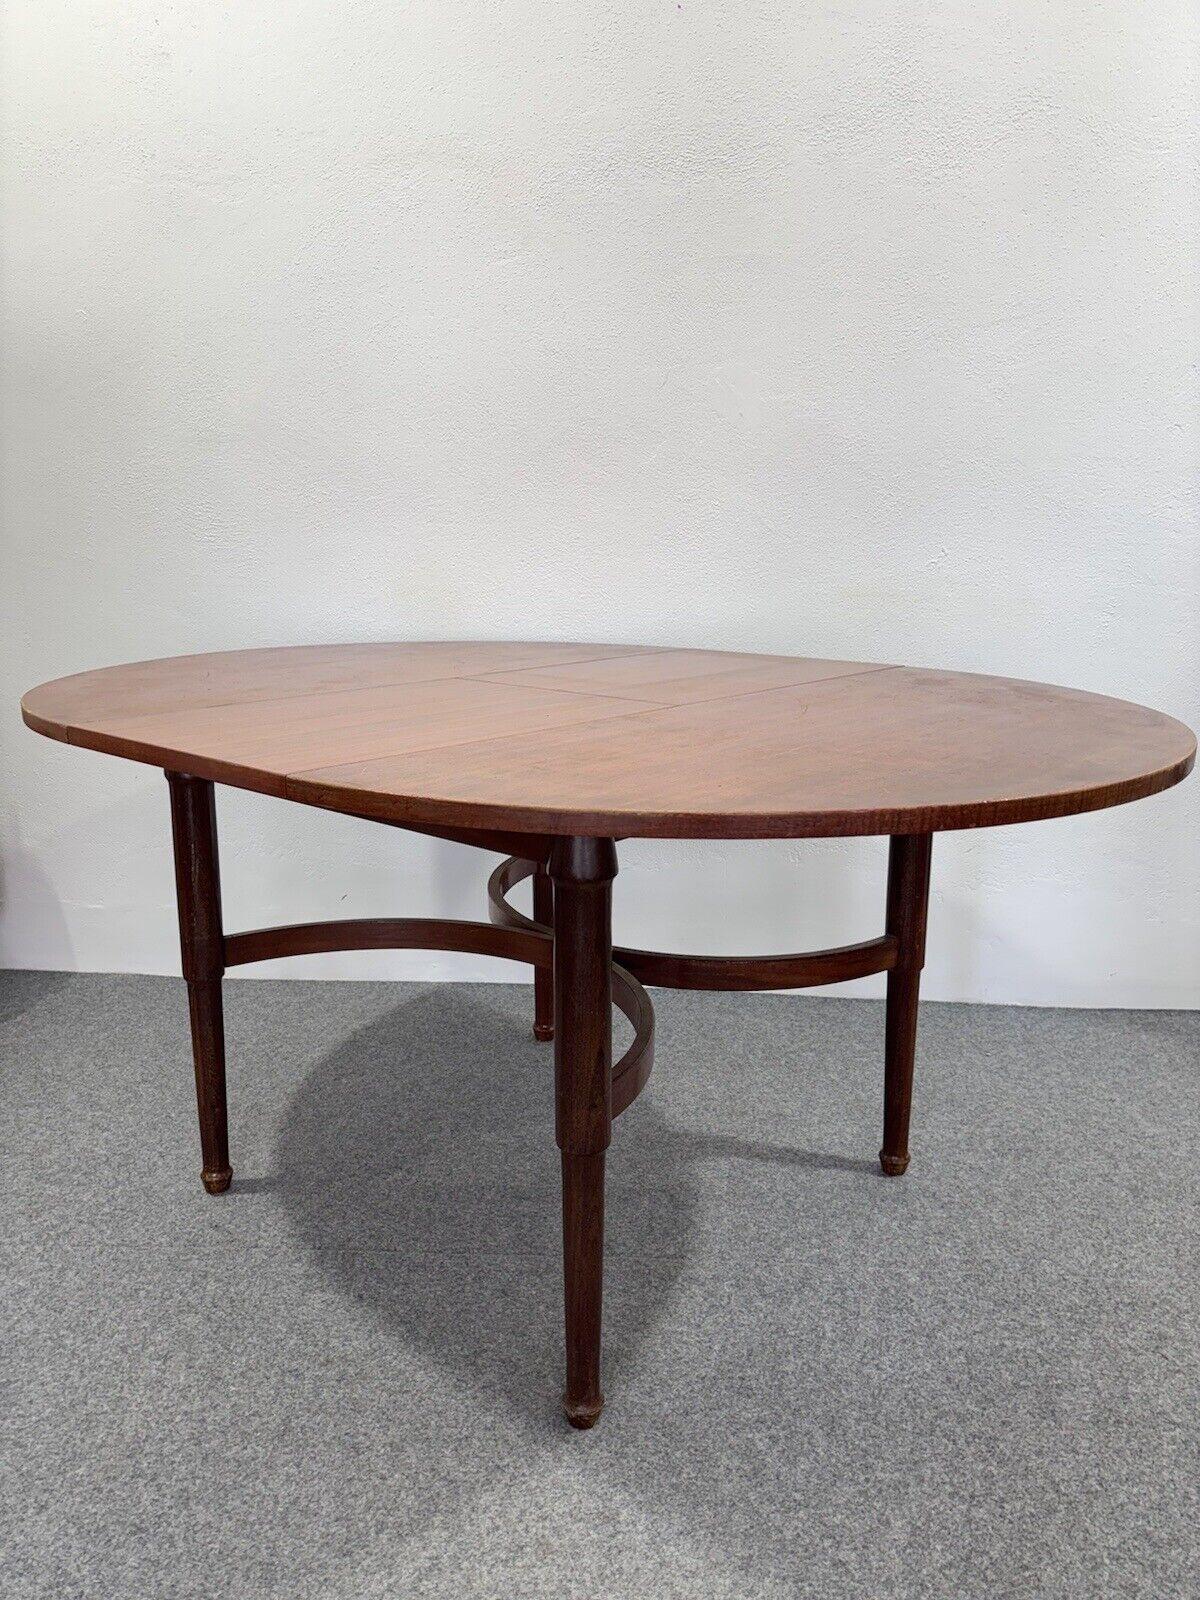 Extendable oval teak dining table Modern design 1970's.
The item is in good conservative condition, only slight and obvious signs of time due to use and age. See photos
Height 75 cm
Open table width 161 cm
Table width closed 118 cm
DEPTH 118 cm